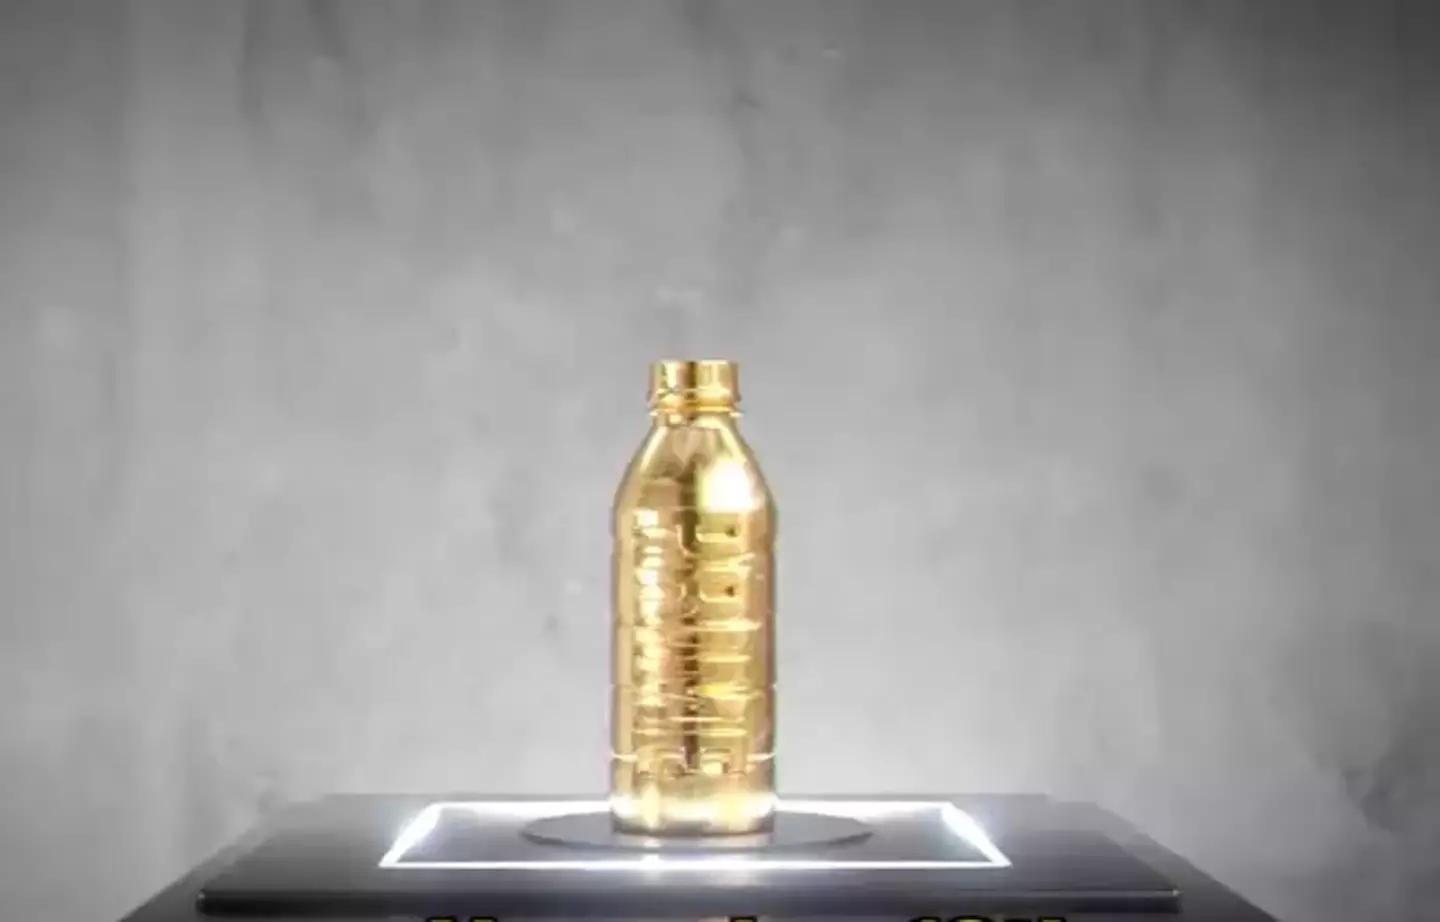 The gold prime bottle was one-of-a-kind.